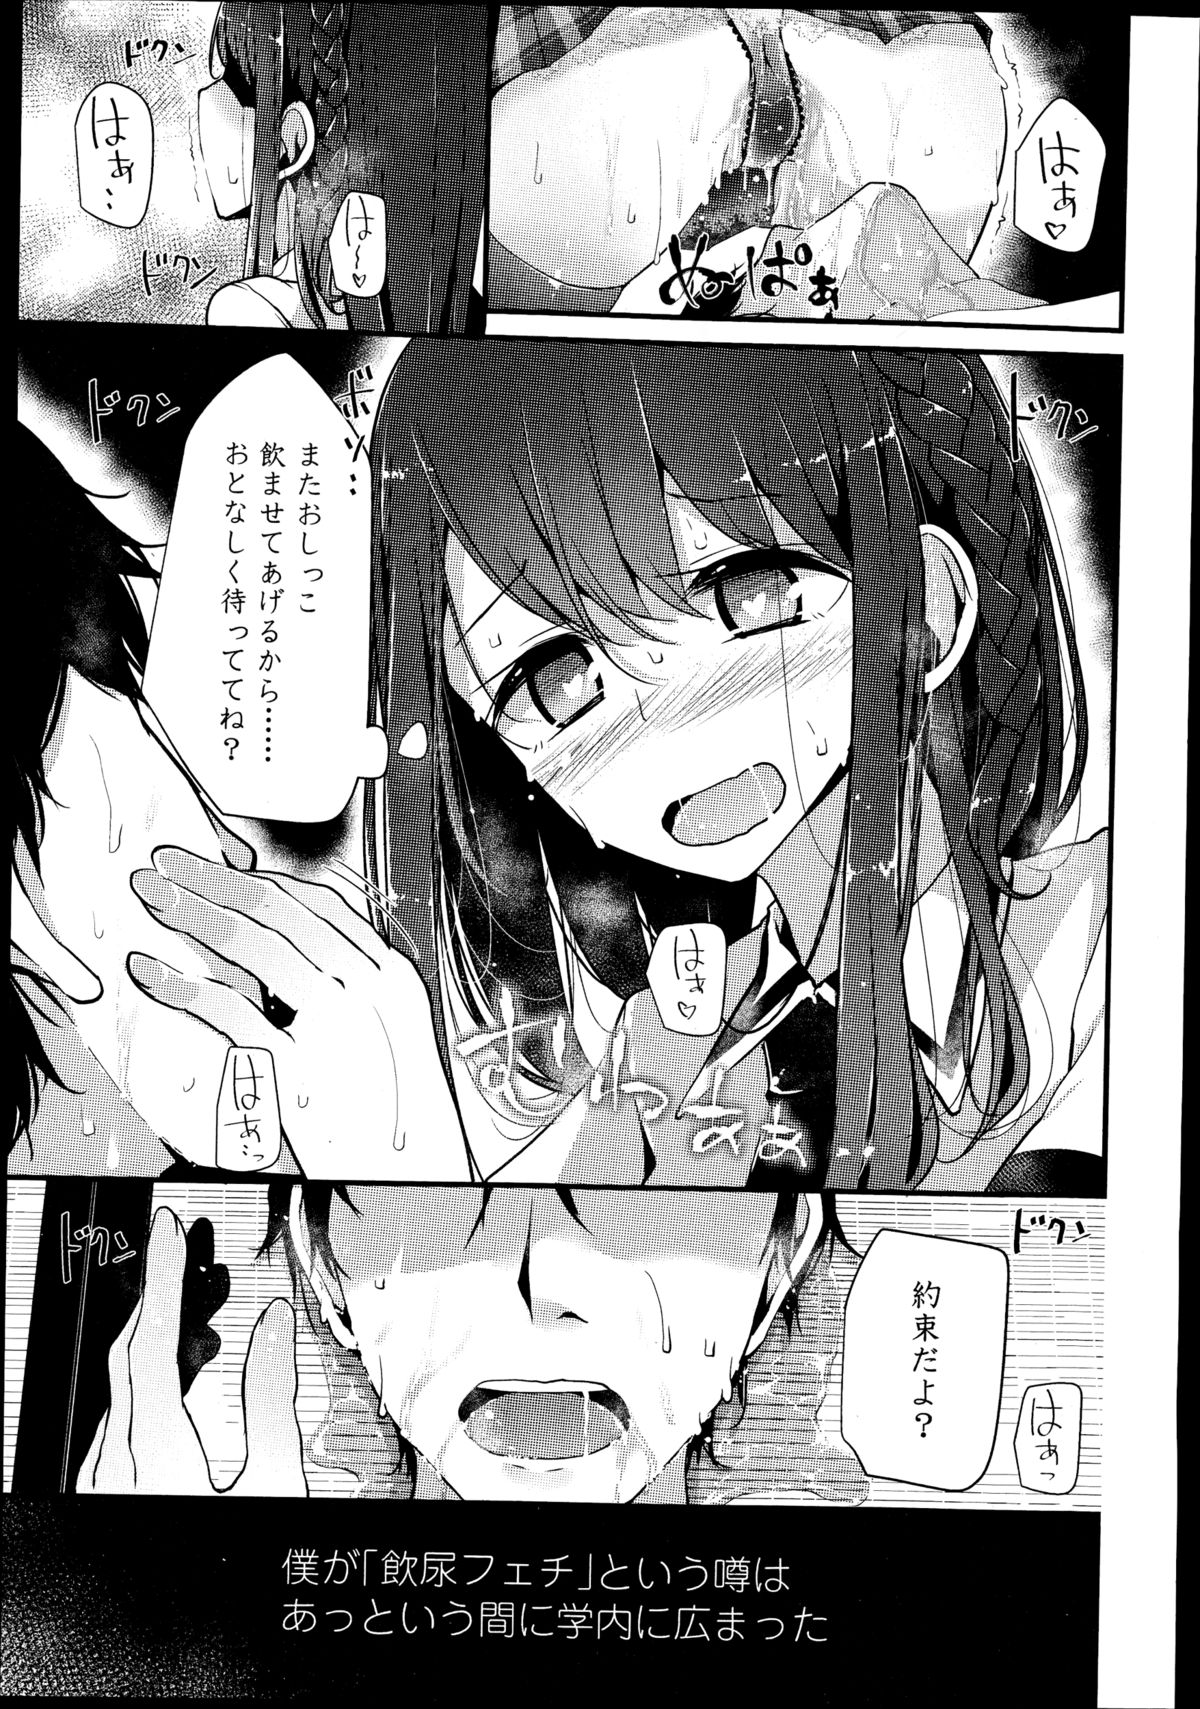 Girls forM Vol. 08 page 37 full